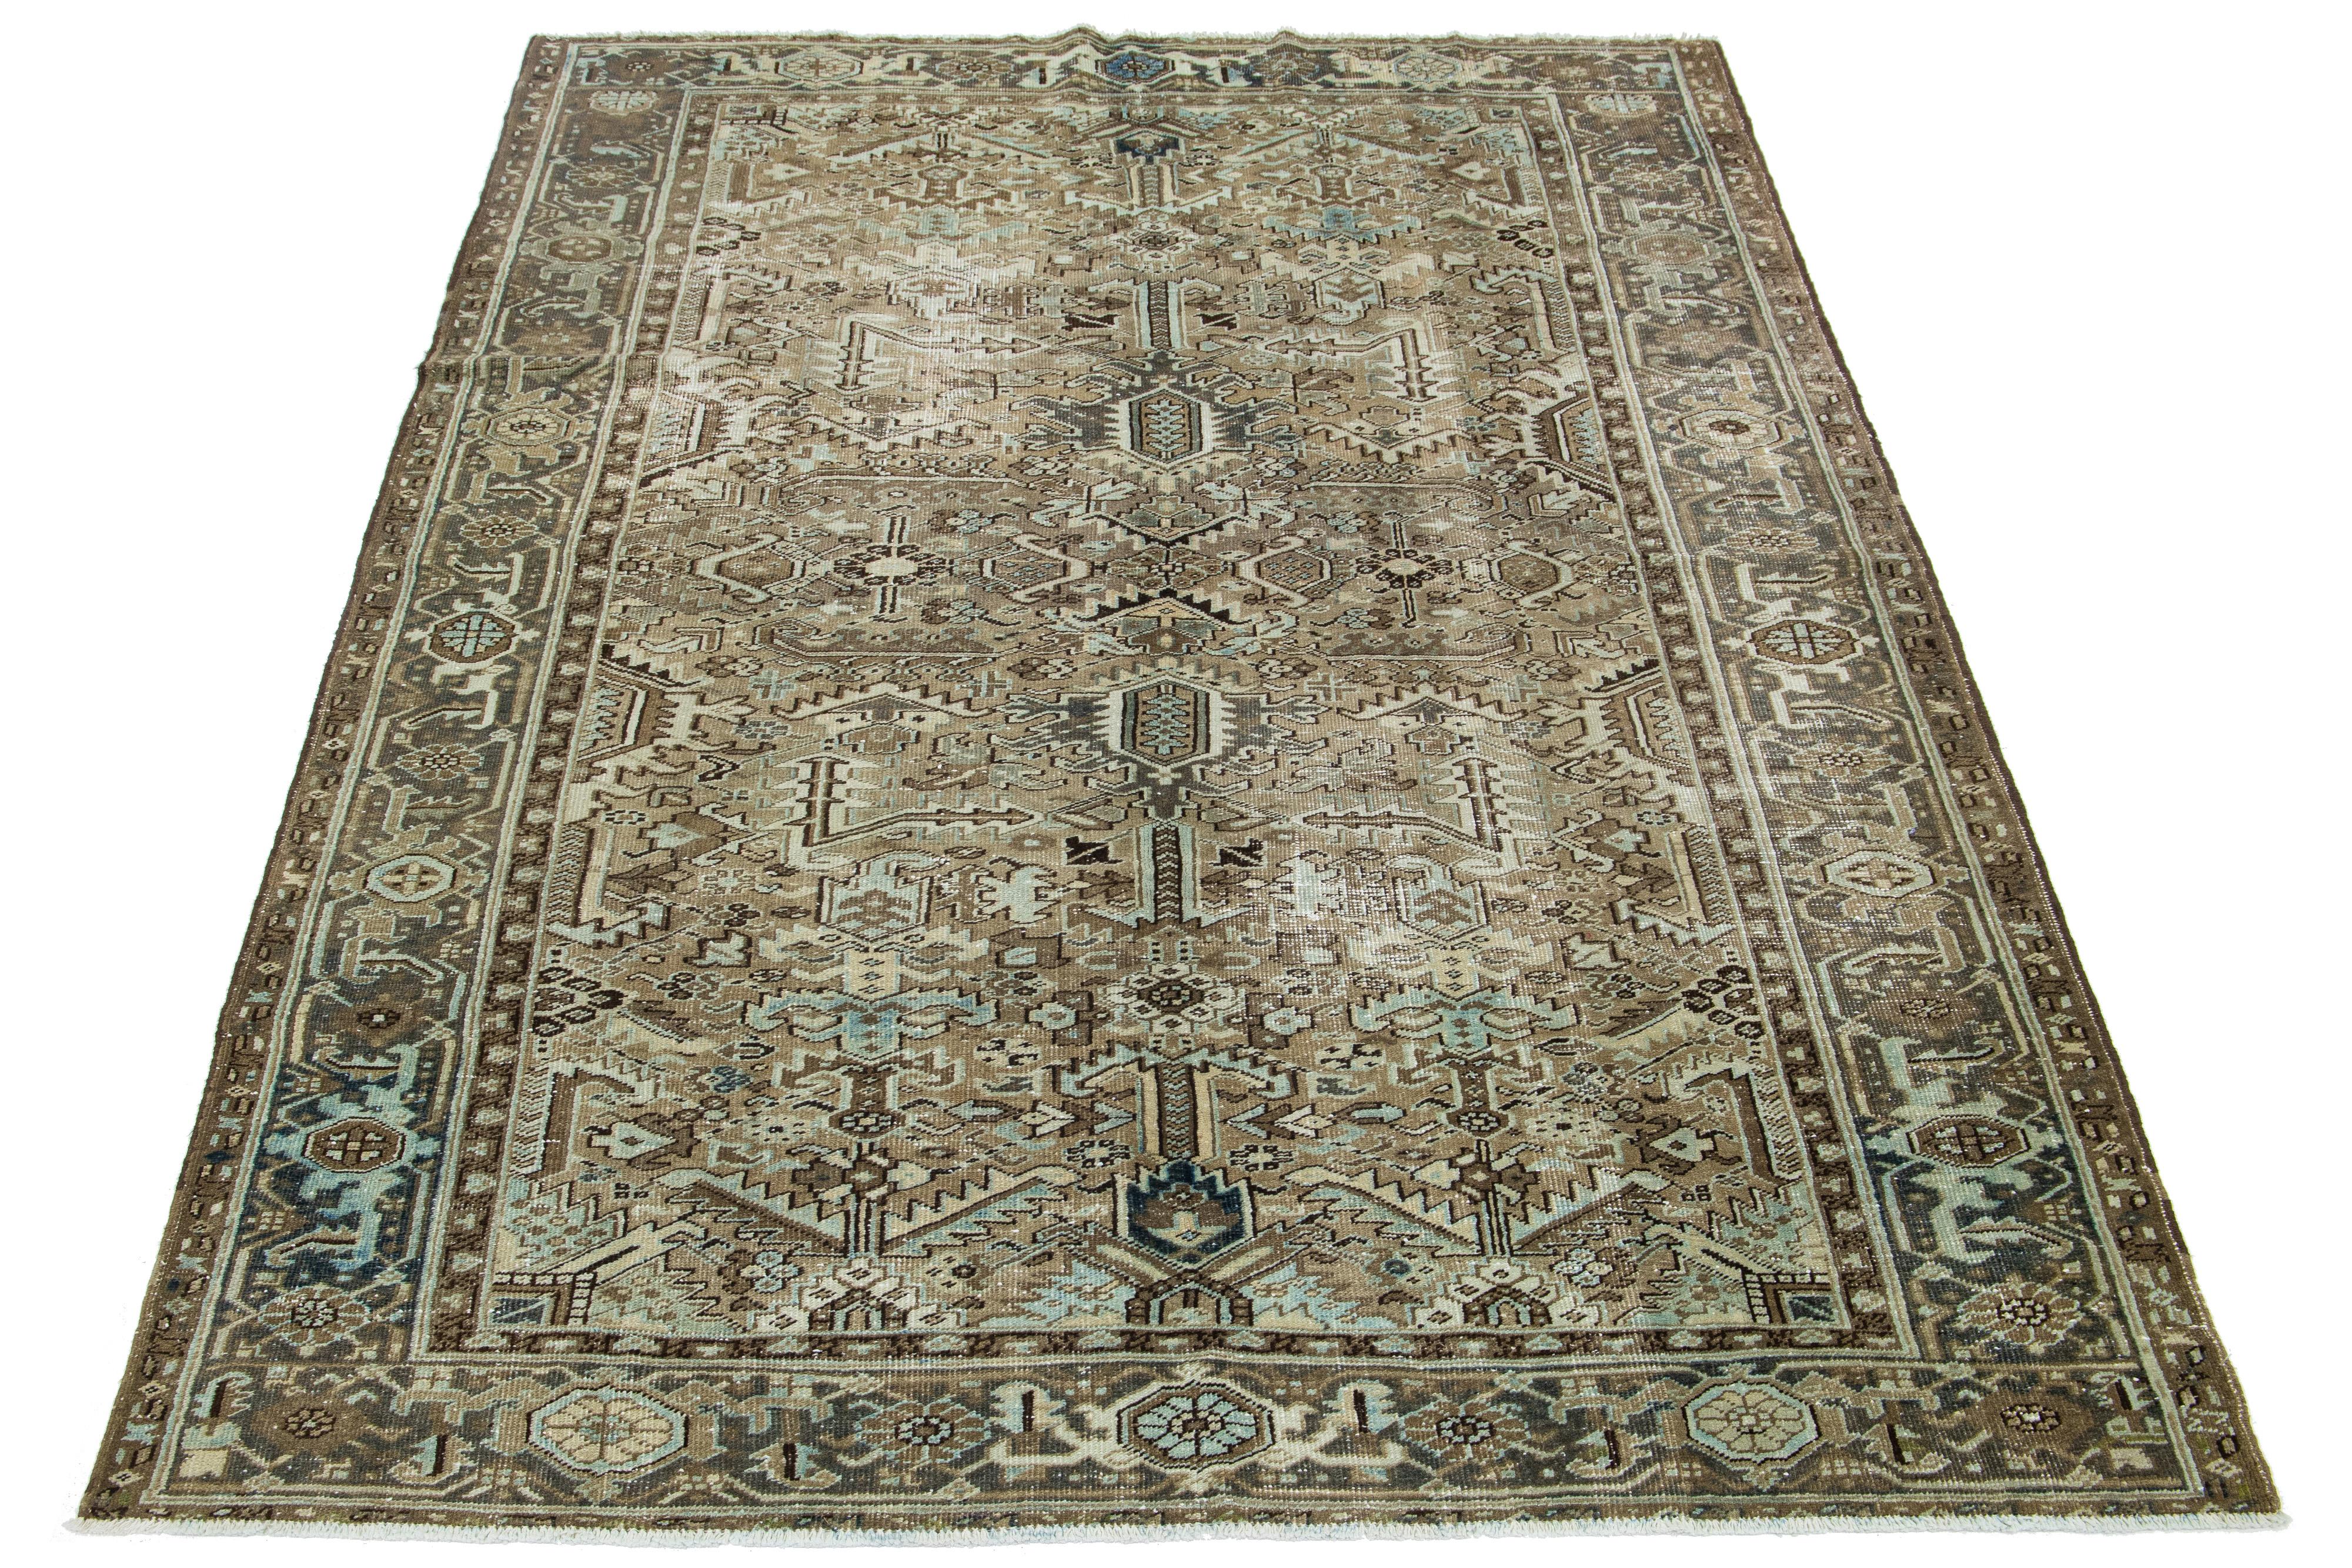 This antique Persian Heriz rug is crafted with hand-knotted wool. The brown-colored field features an allover design embellished with shades of blue and beige.

This rug measures 7' x 10'2